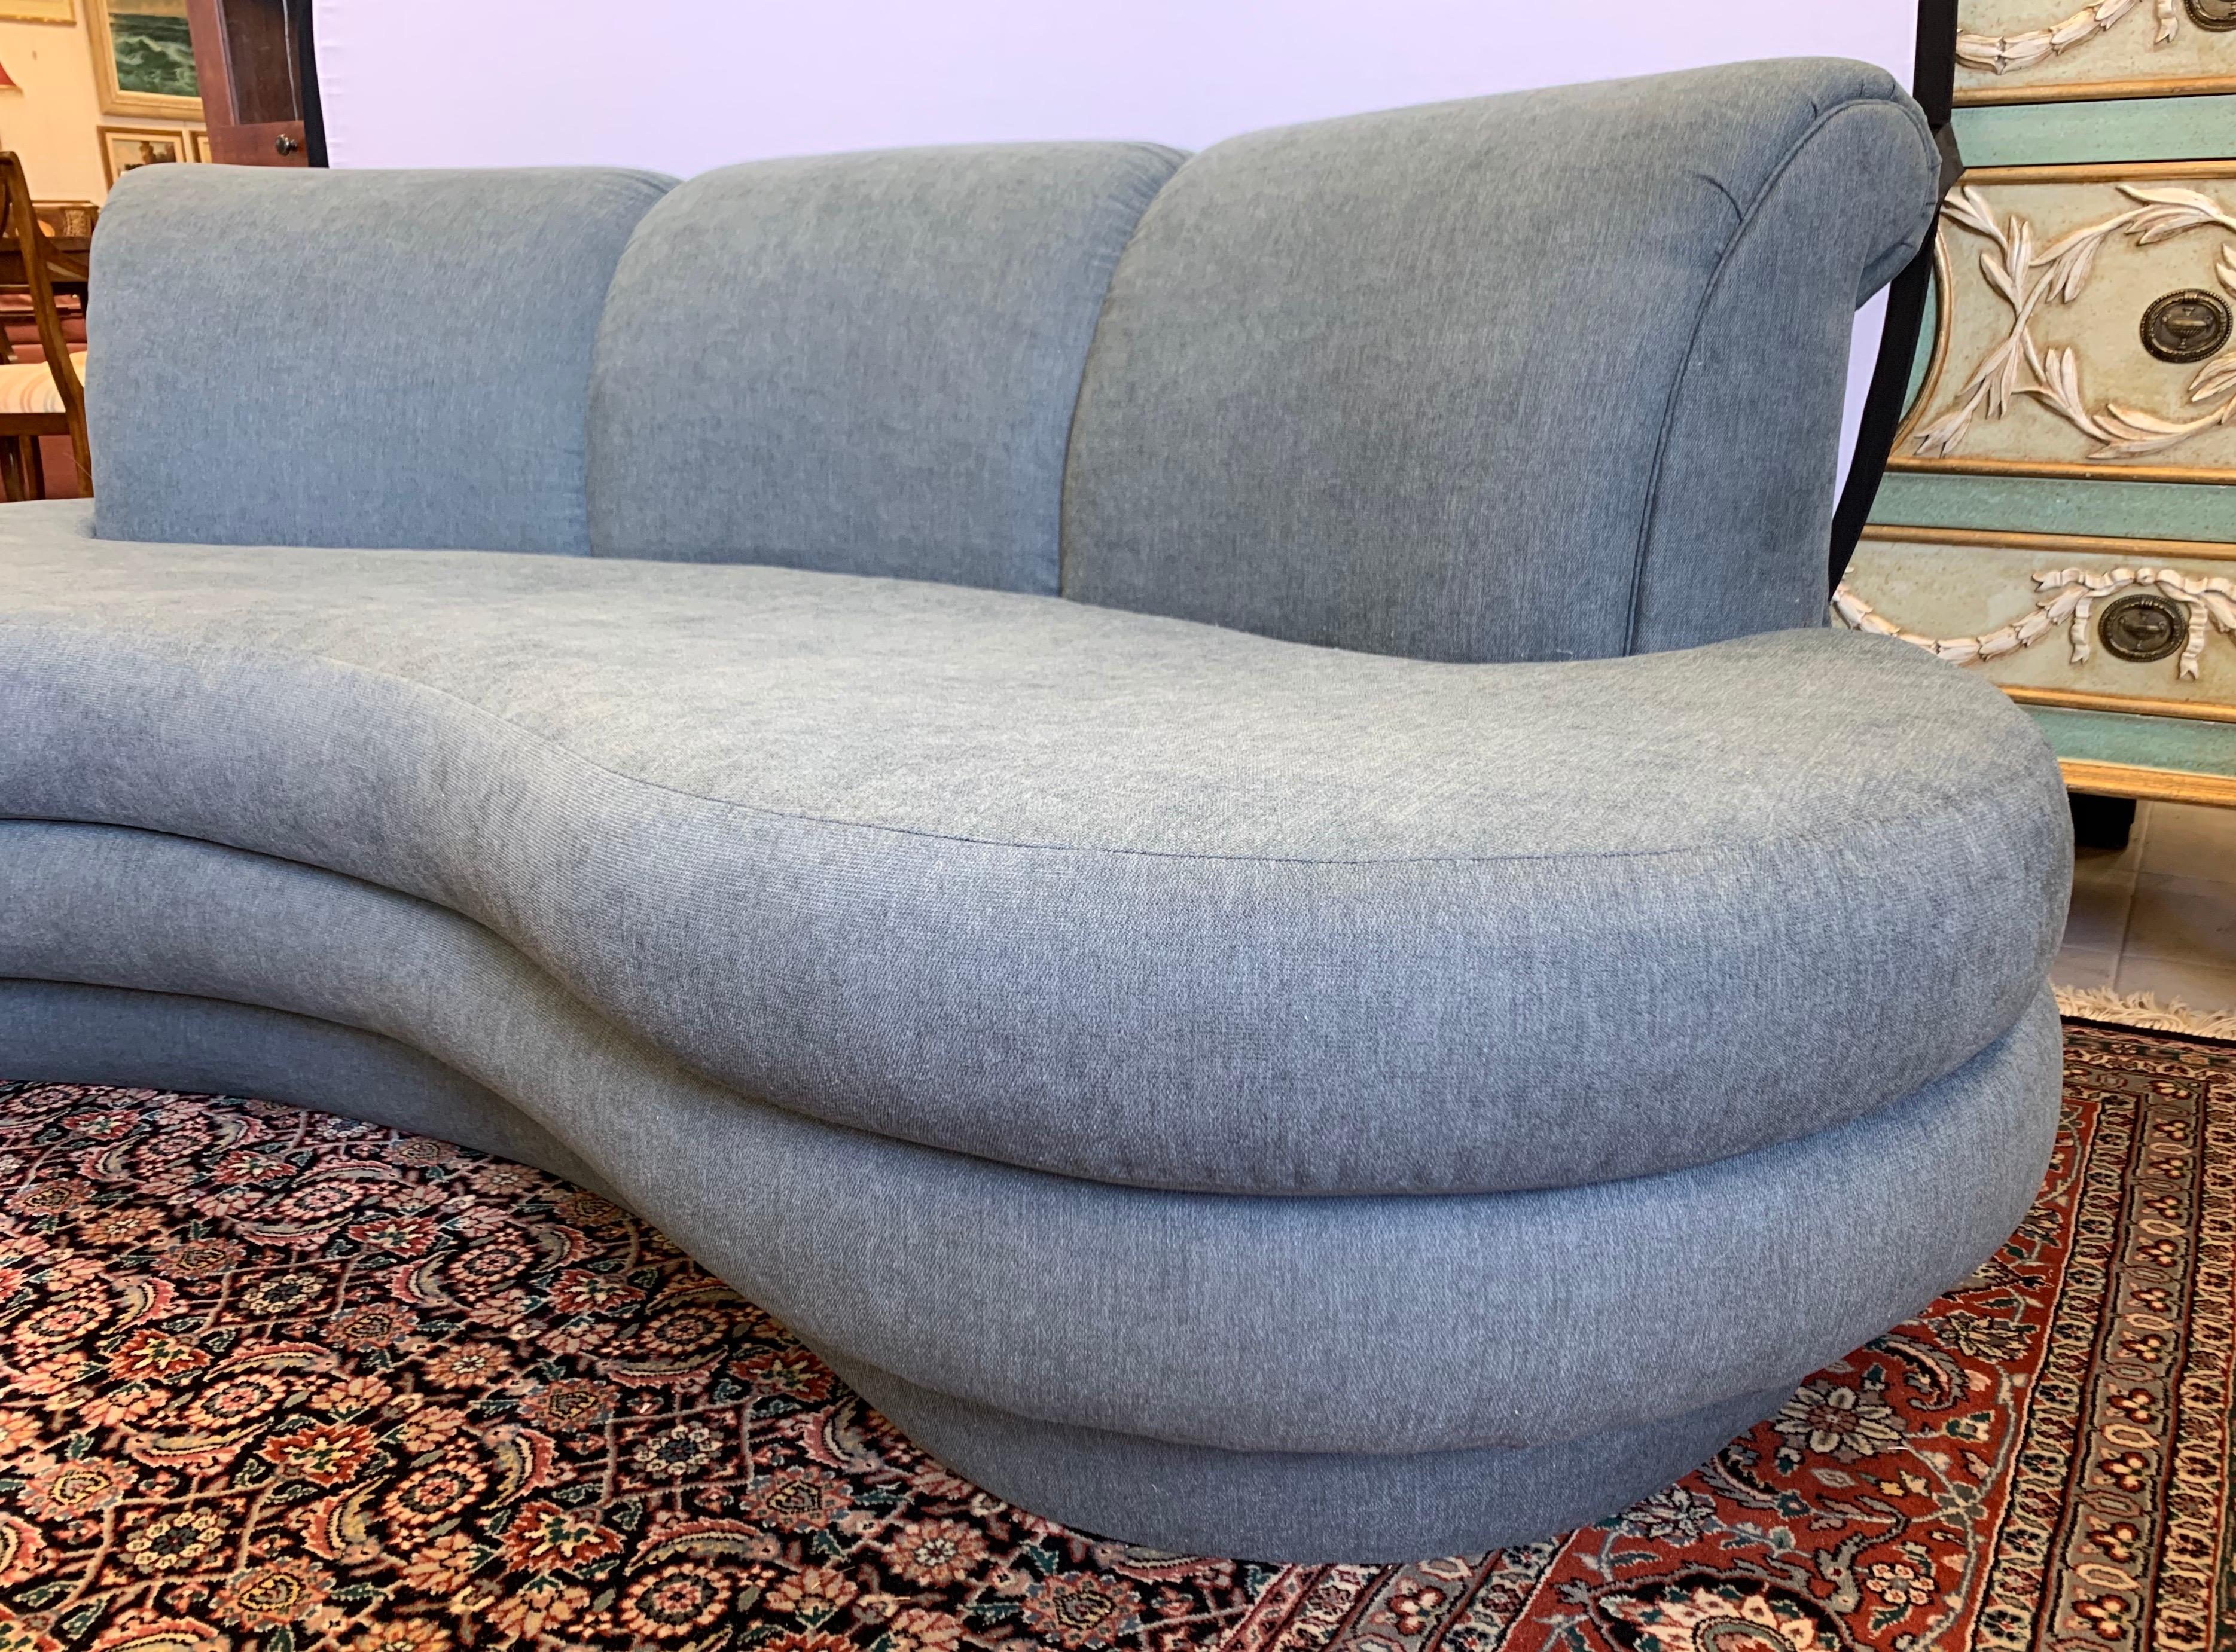 Late 20th Century Adrian Pearsall Cloud Sofa for Comfort Designs Newly Upholstered in Slate Gray 